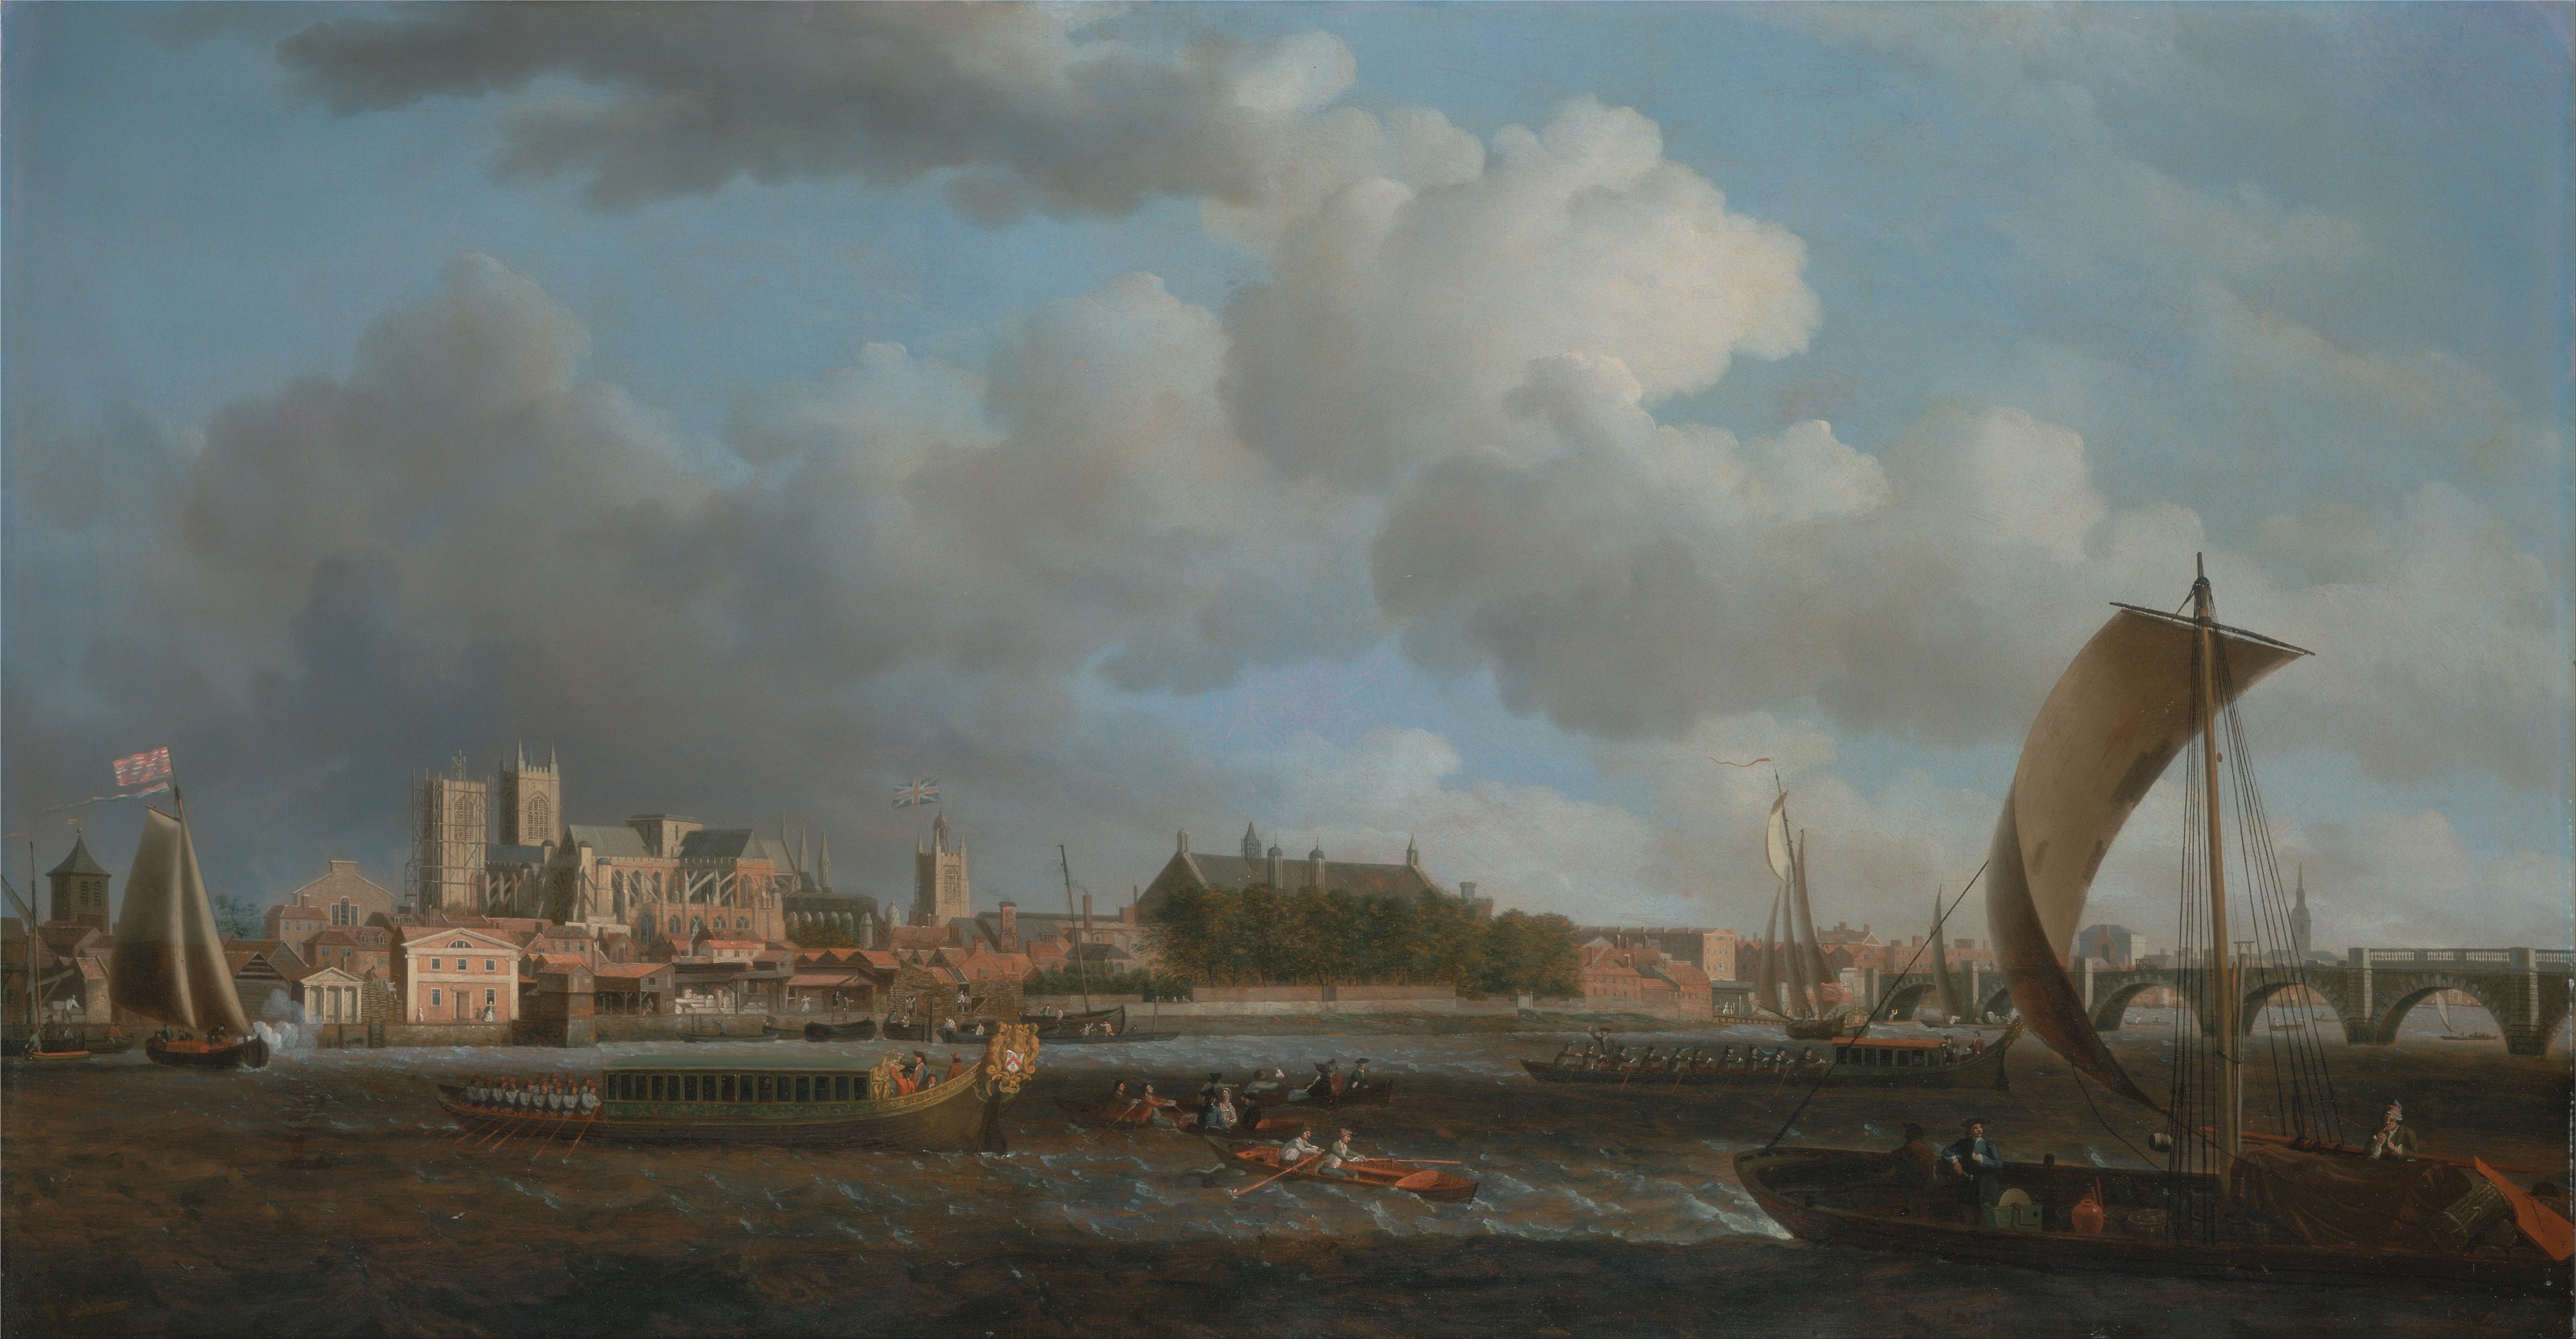 Samuel Scott - Westminster from Lambeth, with the Ceremonial Barge of the Ironmongers' Company - Google Art Project